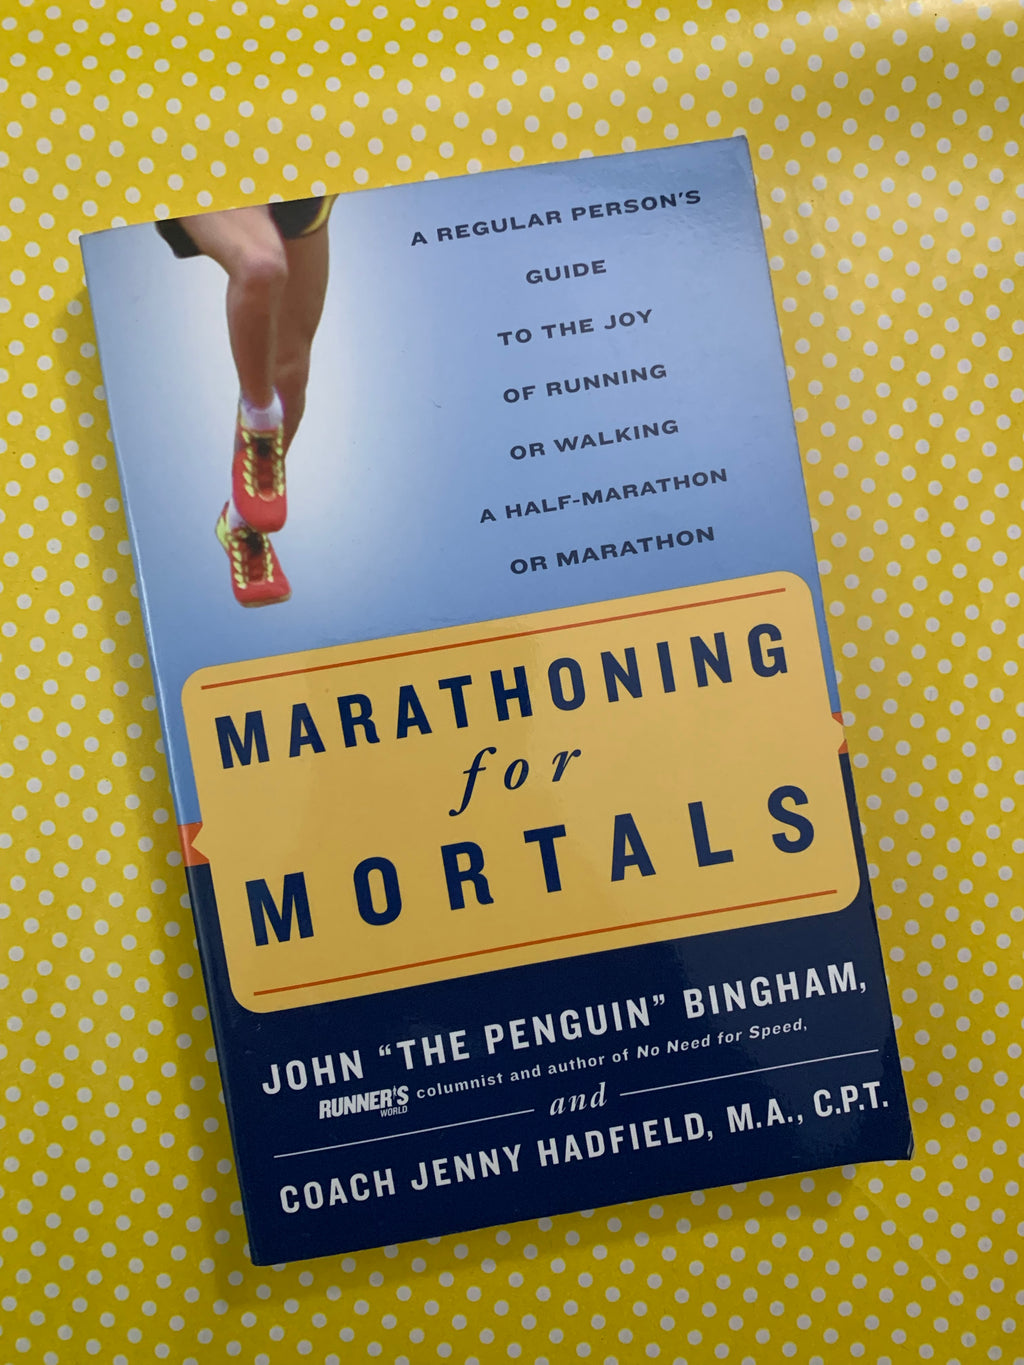 Marathoning for Mortals- By John "The Penguin" Bingham and Coach Jenny Hadfield, M.A. C.P.T.